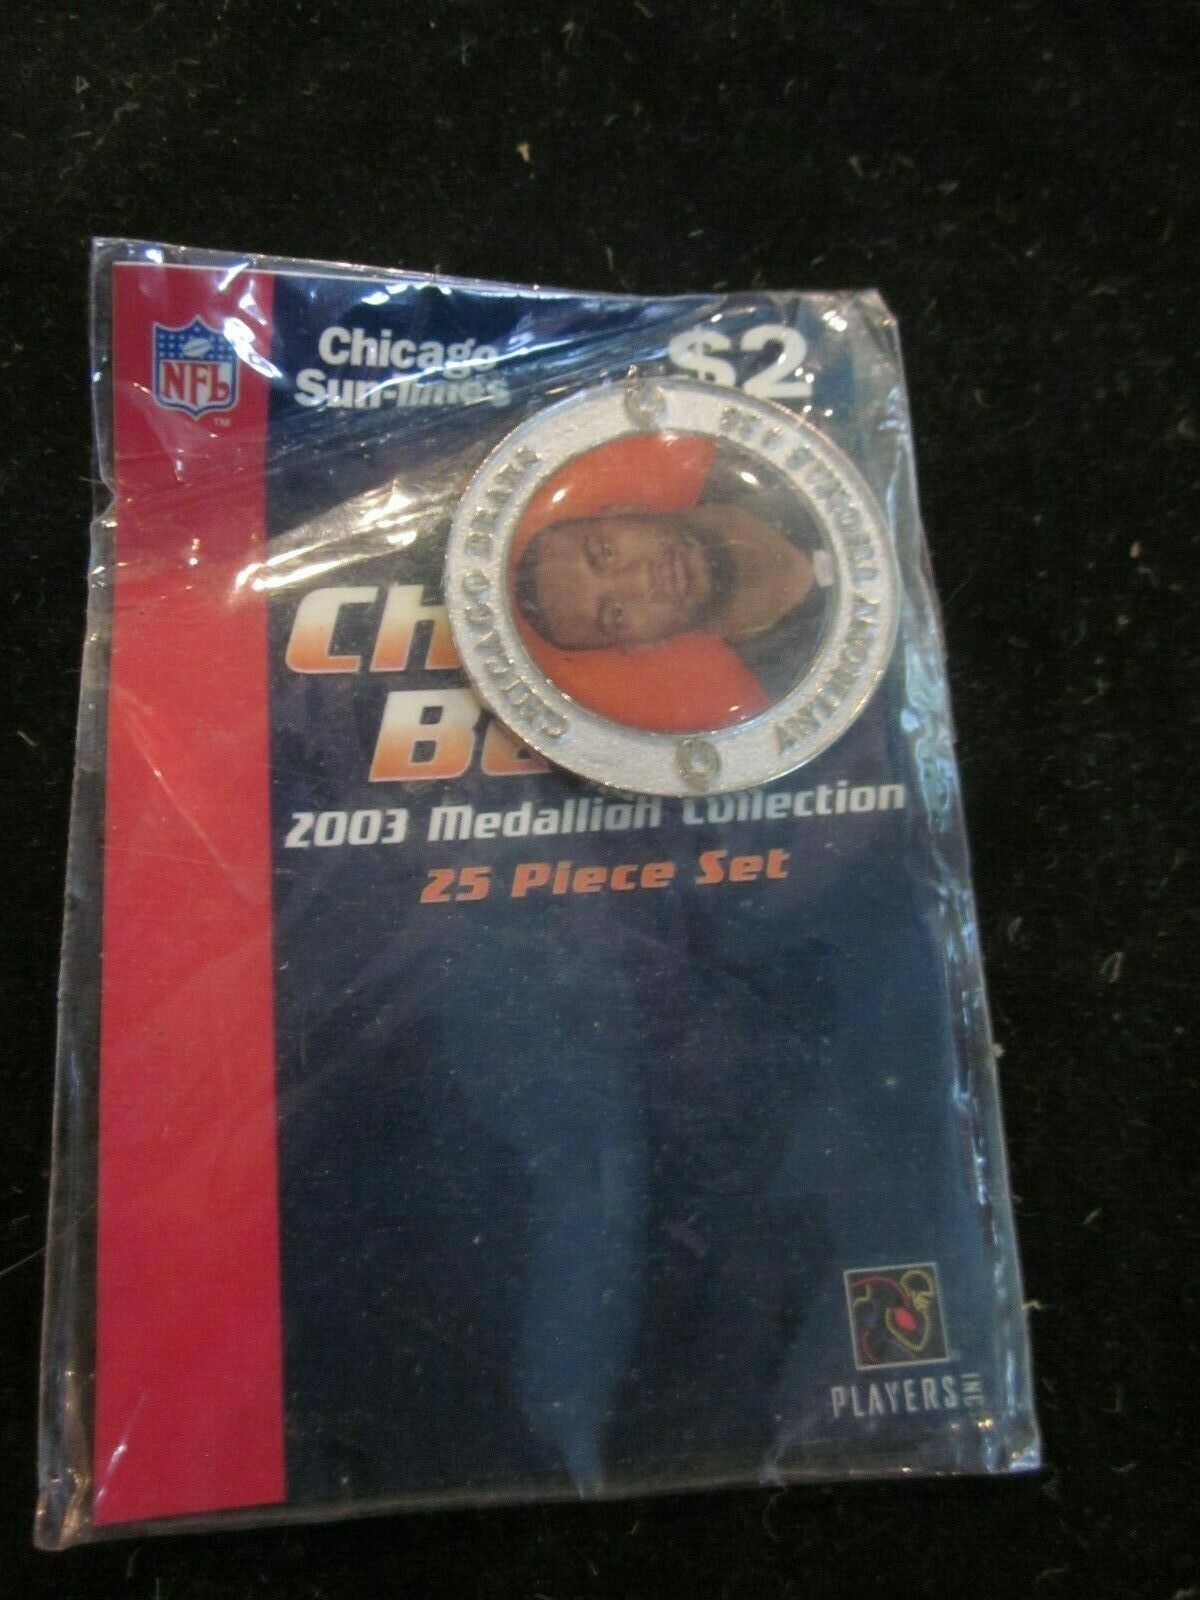 Chicago Sun Times NFL 2003 Chicago Bears Medallion Collection Anthony Thomas #35 - $4.99